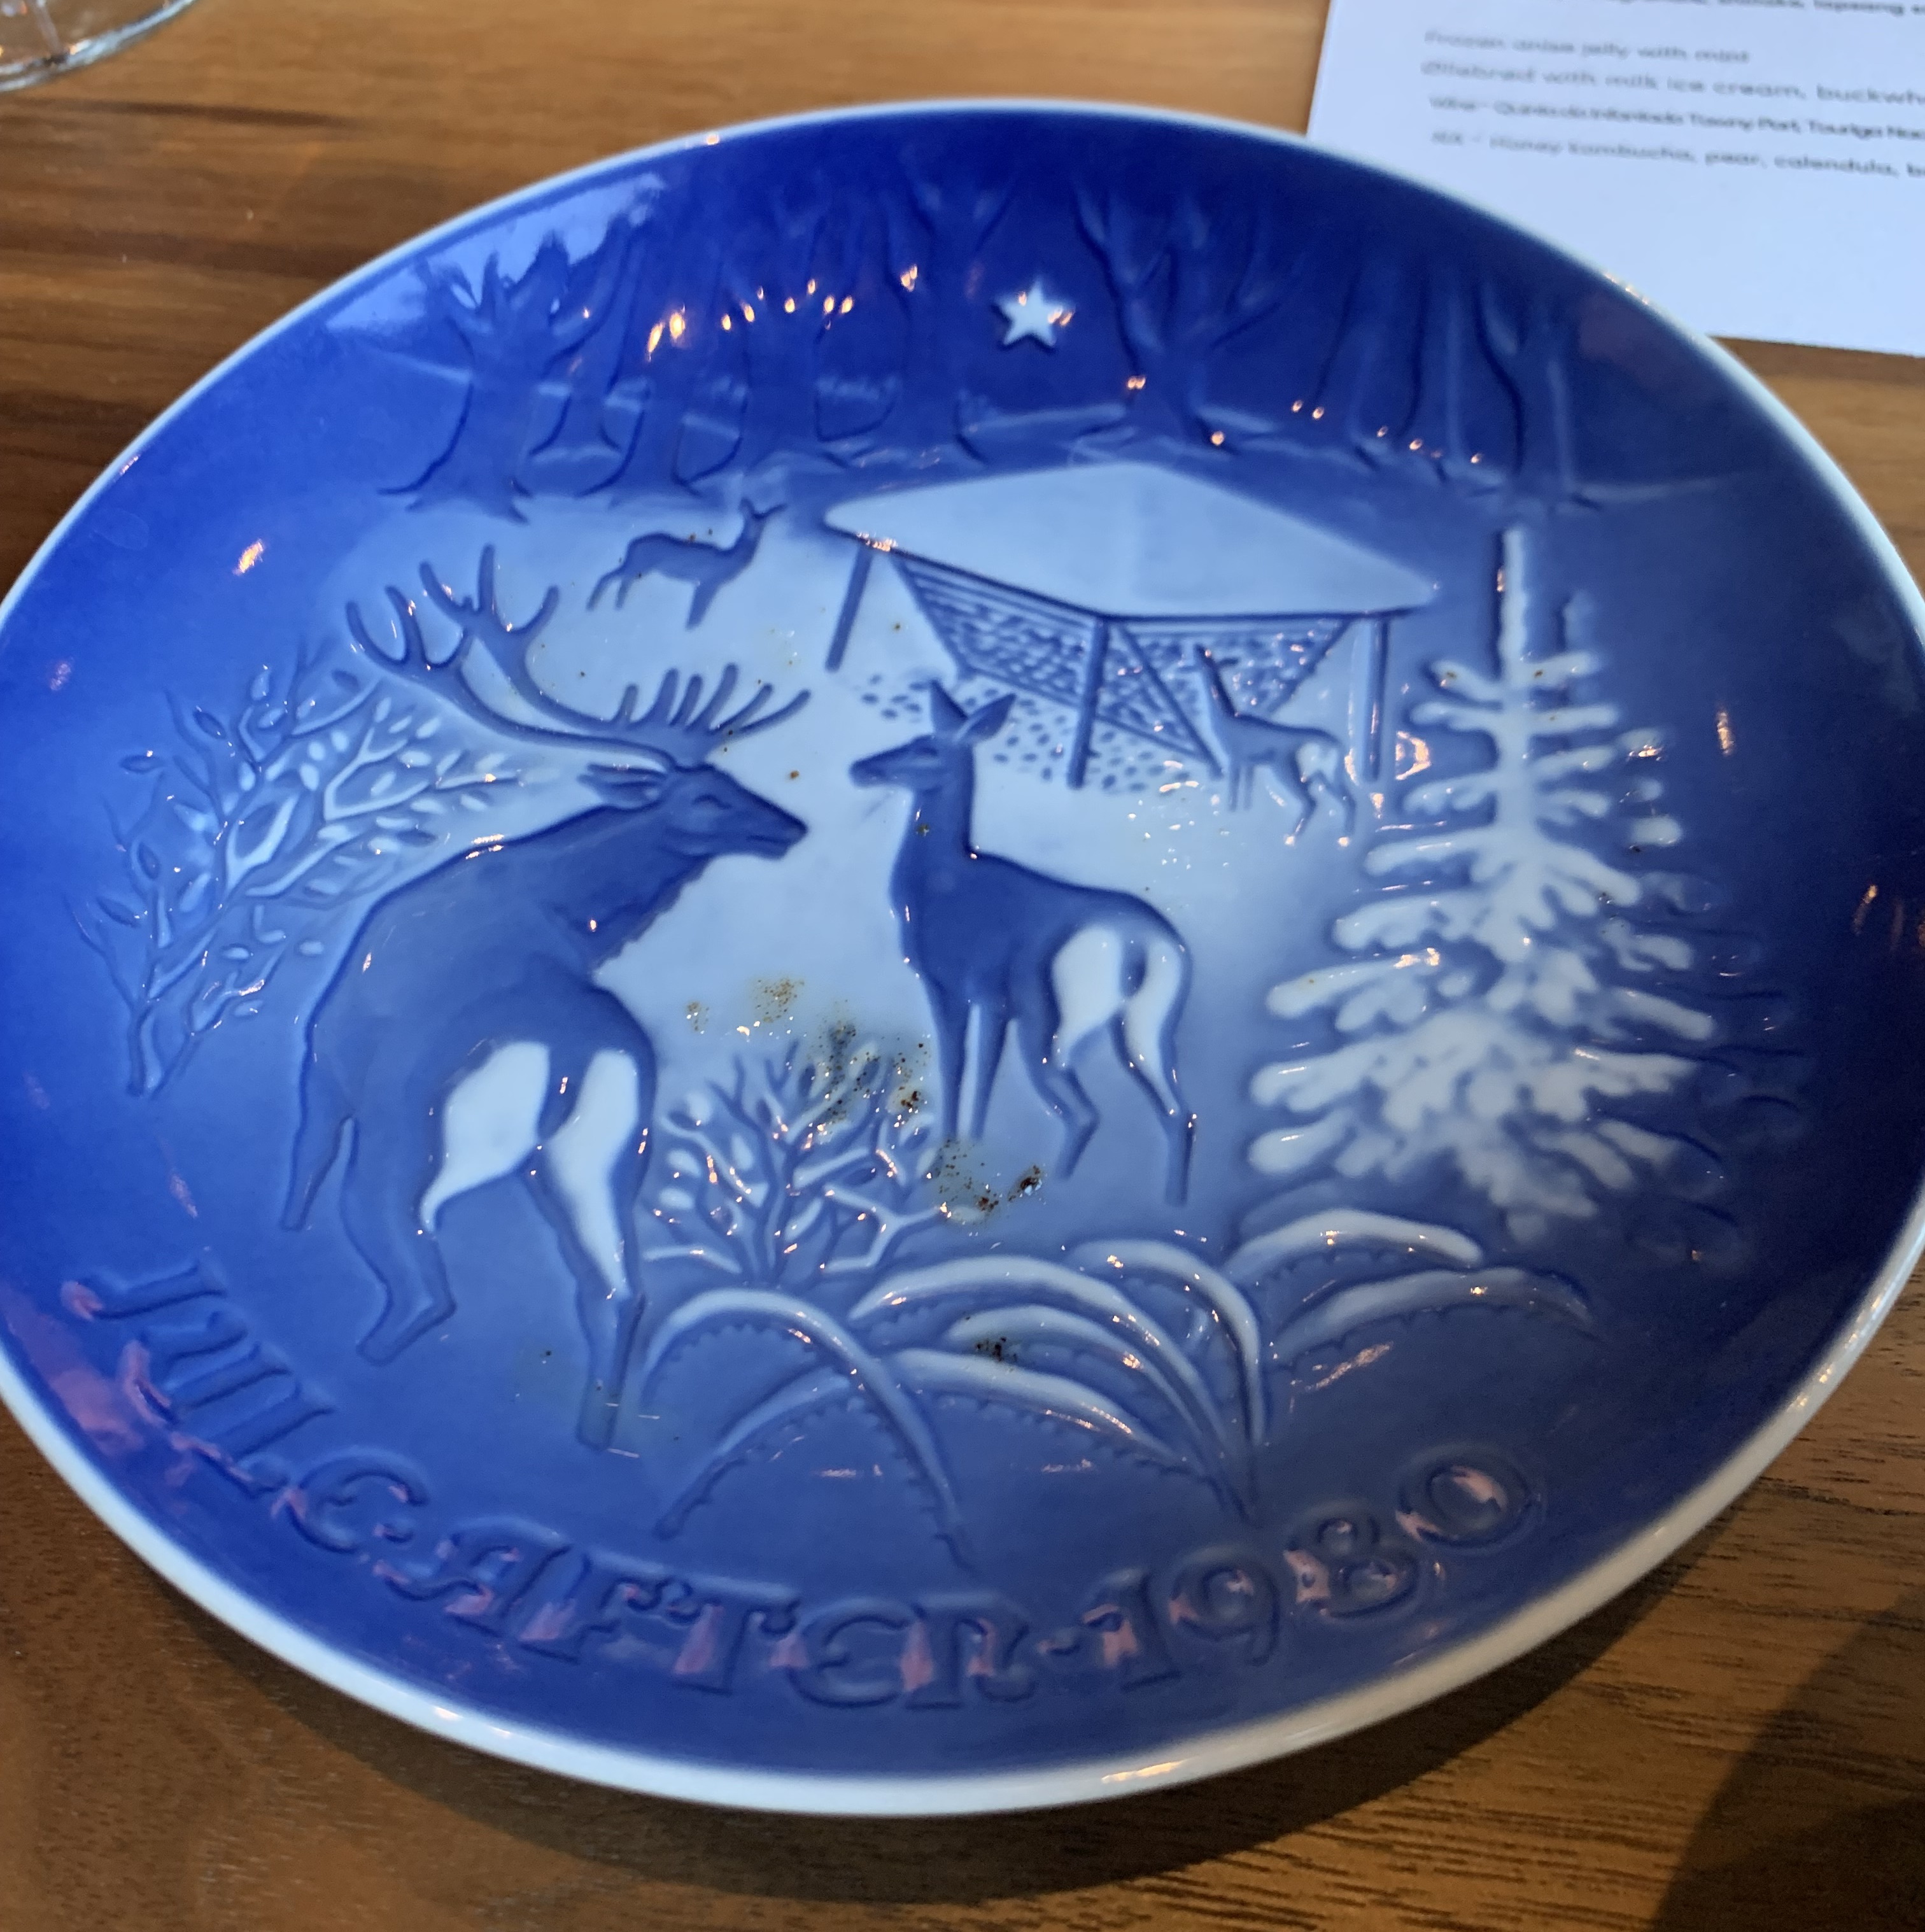 Slightly dirty blue plate depicting a winter scene on the edge of the forest, with two deer showing their voluminous asses to you.